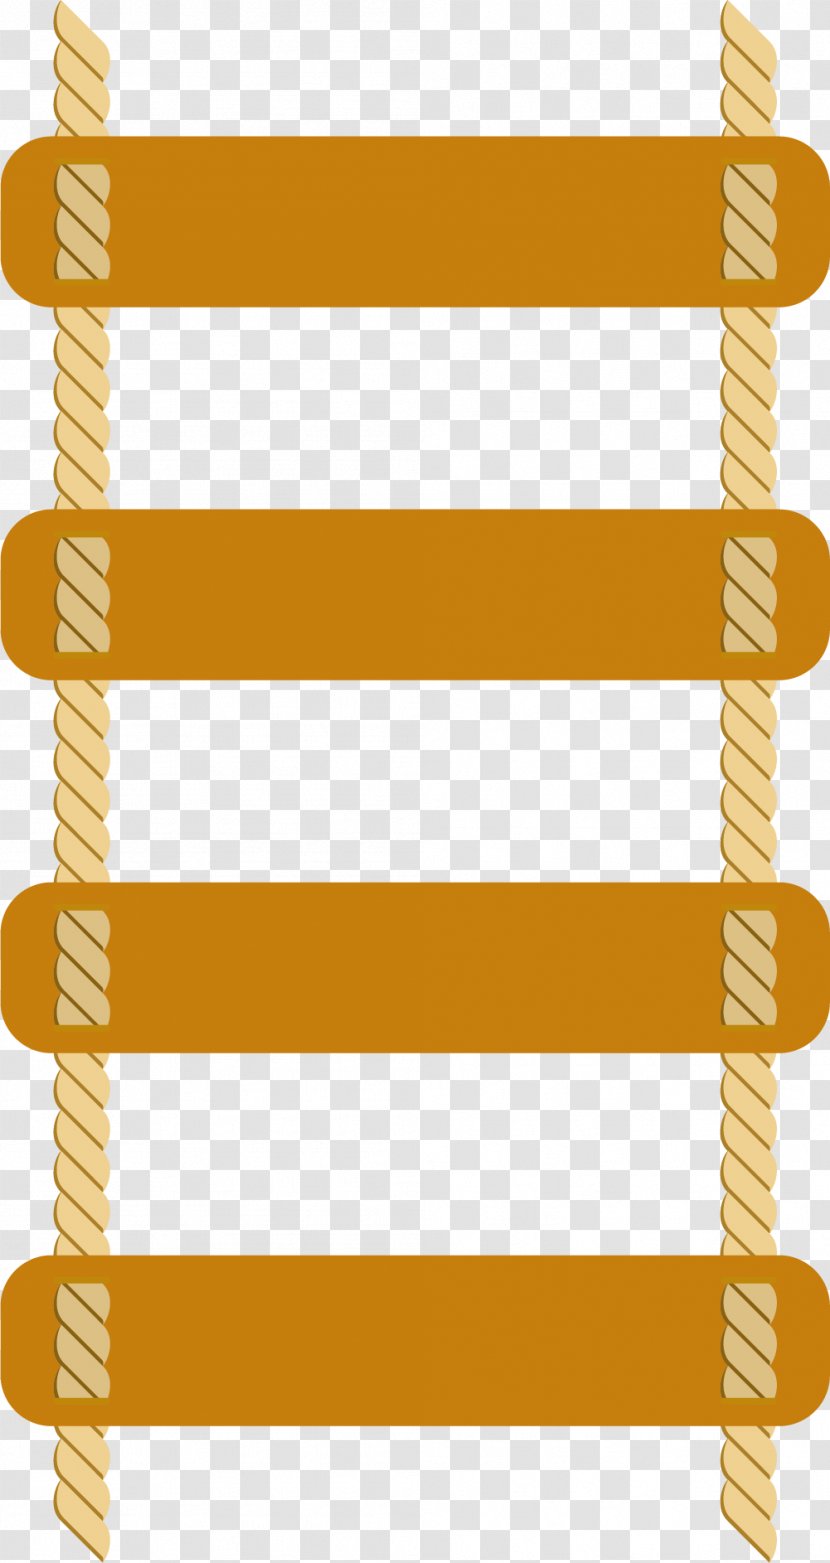 Yellow Line - Rectangle - Straight Ladder Transparent PNG